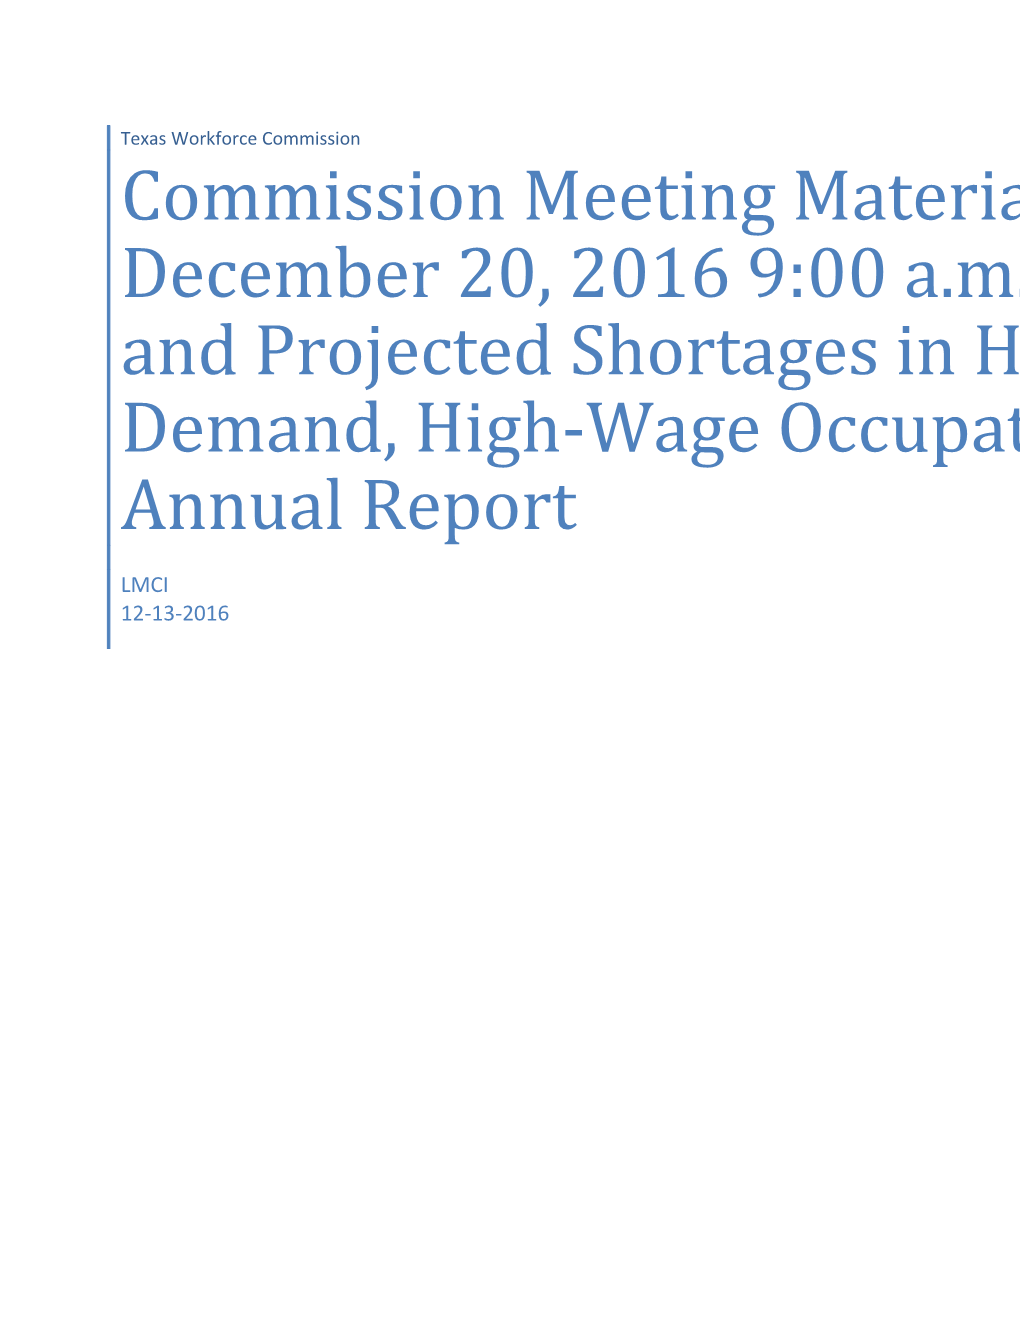 Commission Meeting Materials December 20, 2016 9:00 A.M. - Existing and Projected Shortages